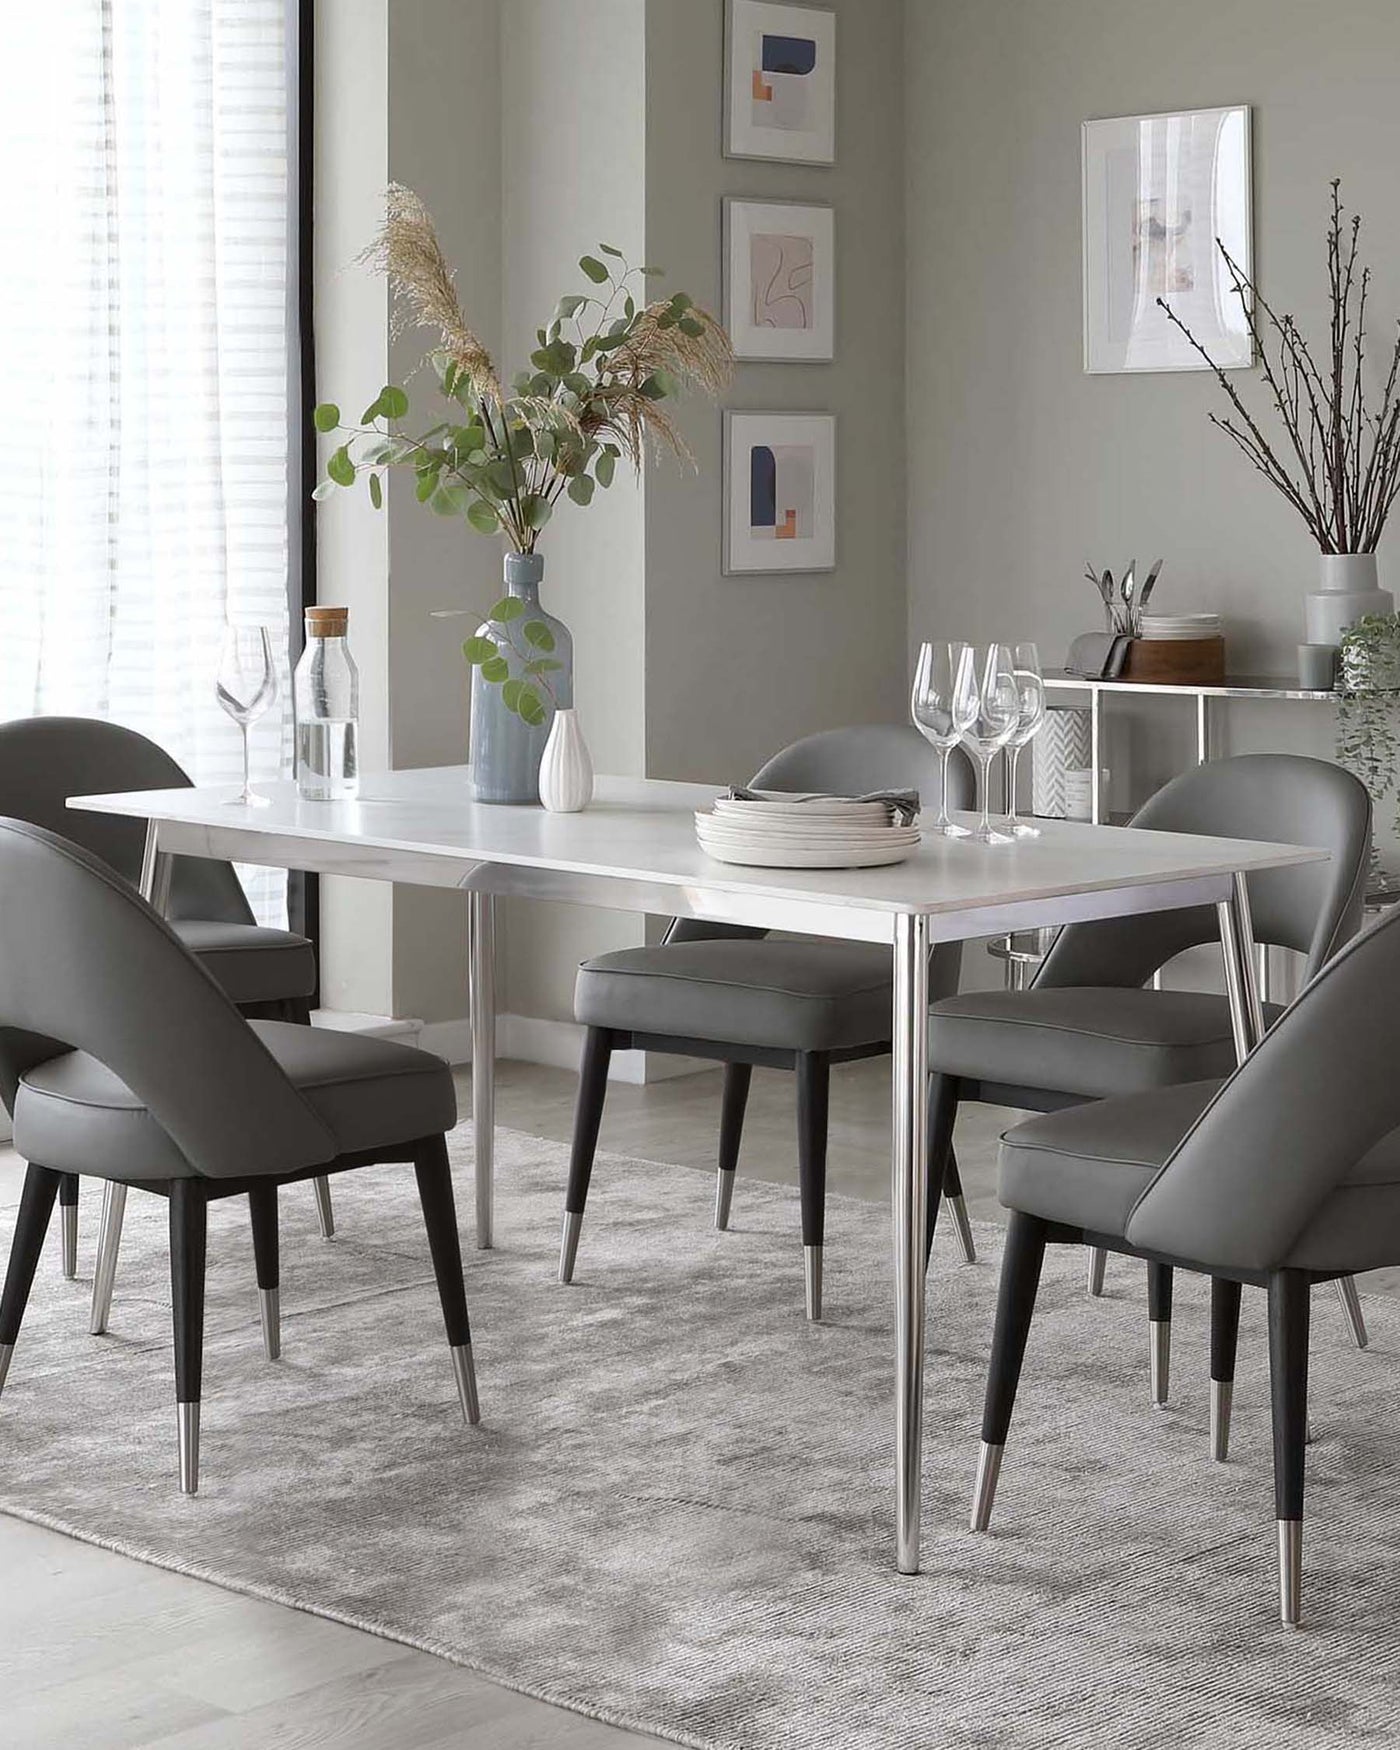 Modern dining room furniture set featuring a white rectangular table with a sleek, minimalist design and tapered metal legs. Accompanied by six elegant, dark grey upholstered chairs with comfortable curved backrests and slender metal legs, matching the table. Set on a textured grey area rug, creating a contemporary and inviting dining space.